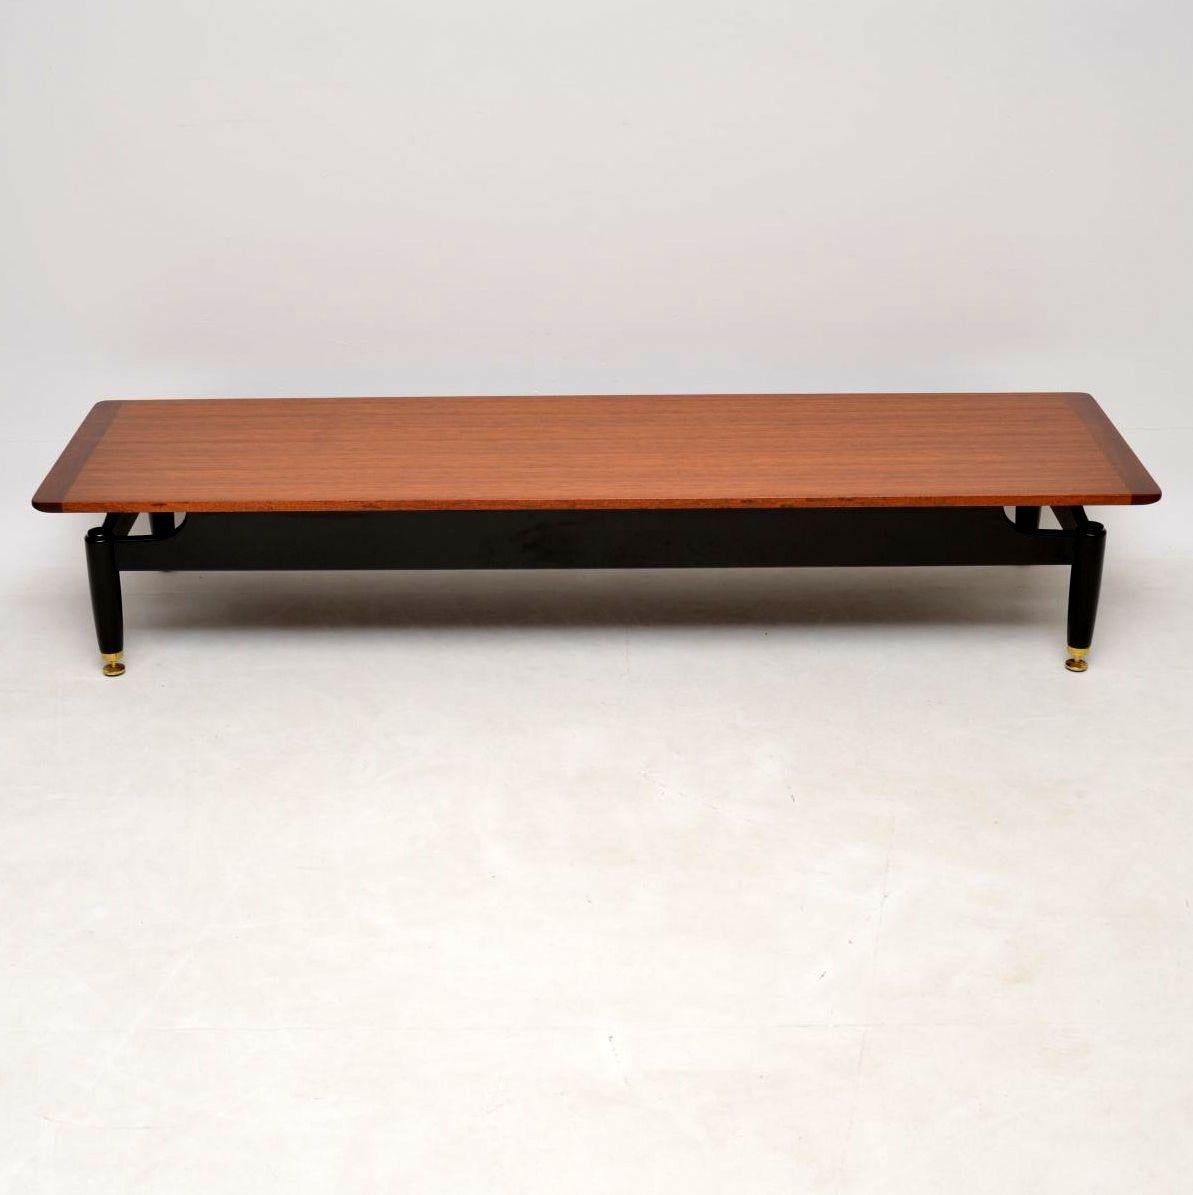 A stylish and extremely well made vintage coffee table by G- Plan, this dates from the 1950-60’s. The top is beautiful afromosia wood, the base is ebonised wood and sits on brass adjustable feet. It’s a great size, very low and long, this could be